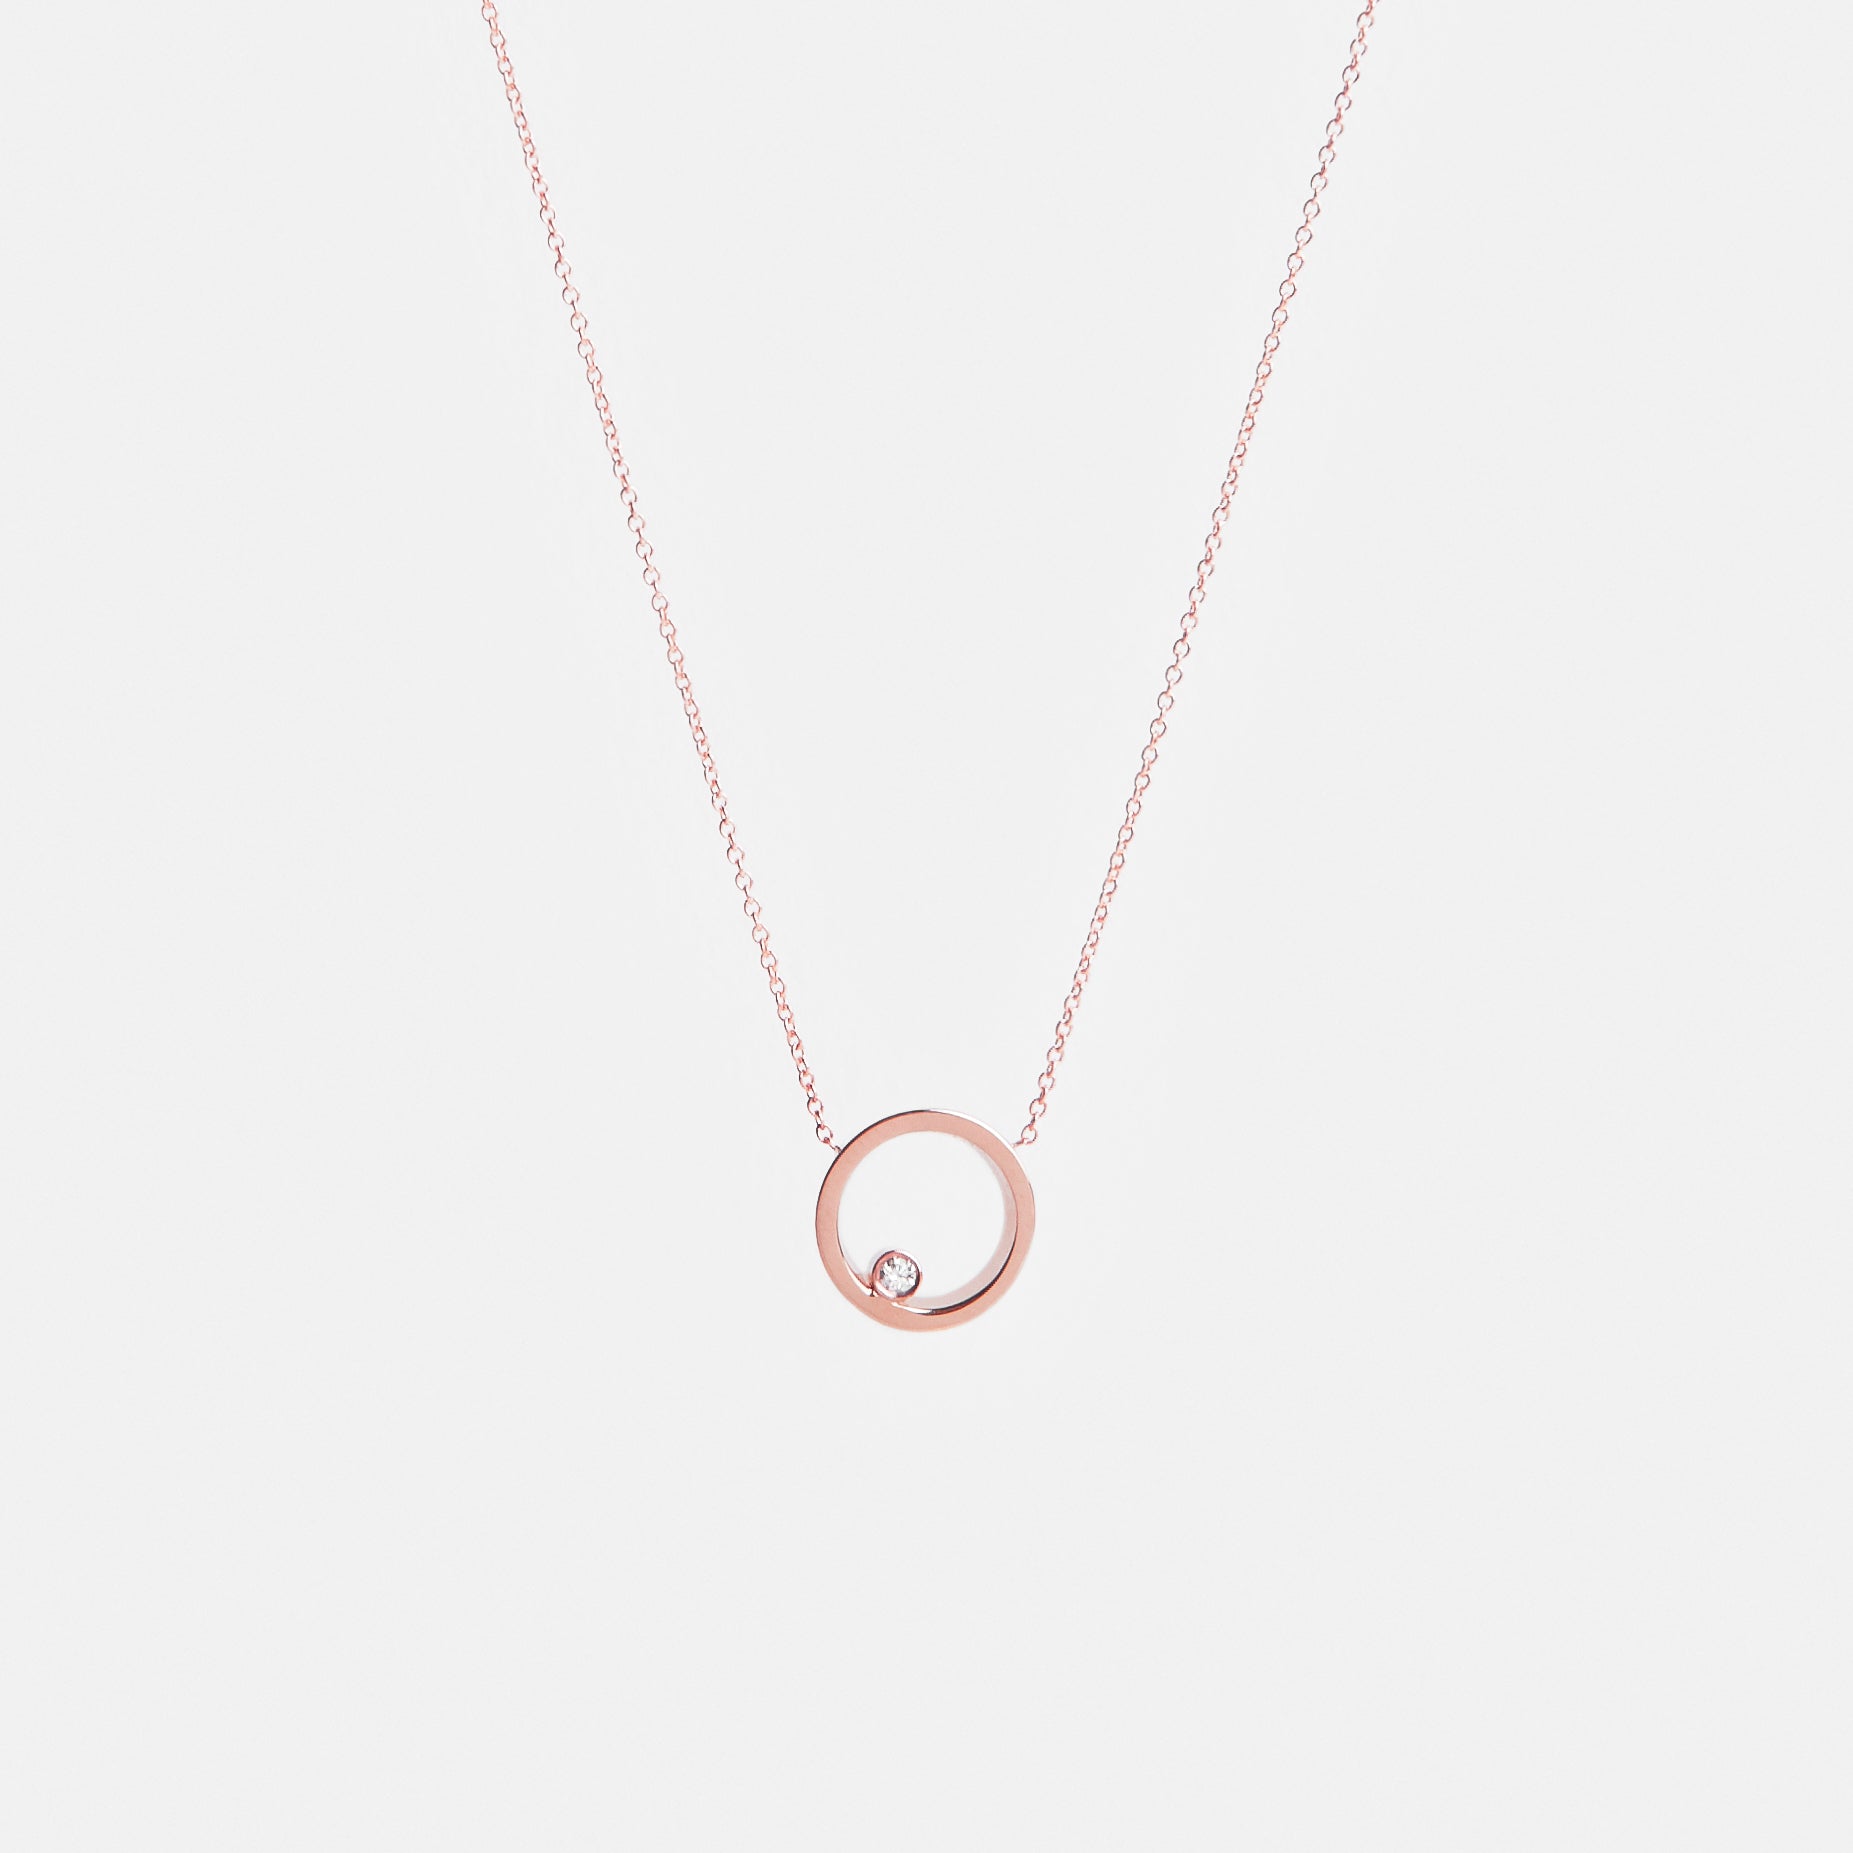 Ila Cool Necklace in 14k Rose Gold set with White Diamond By SHW Fine Jewelry NYC